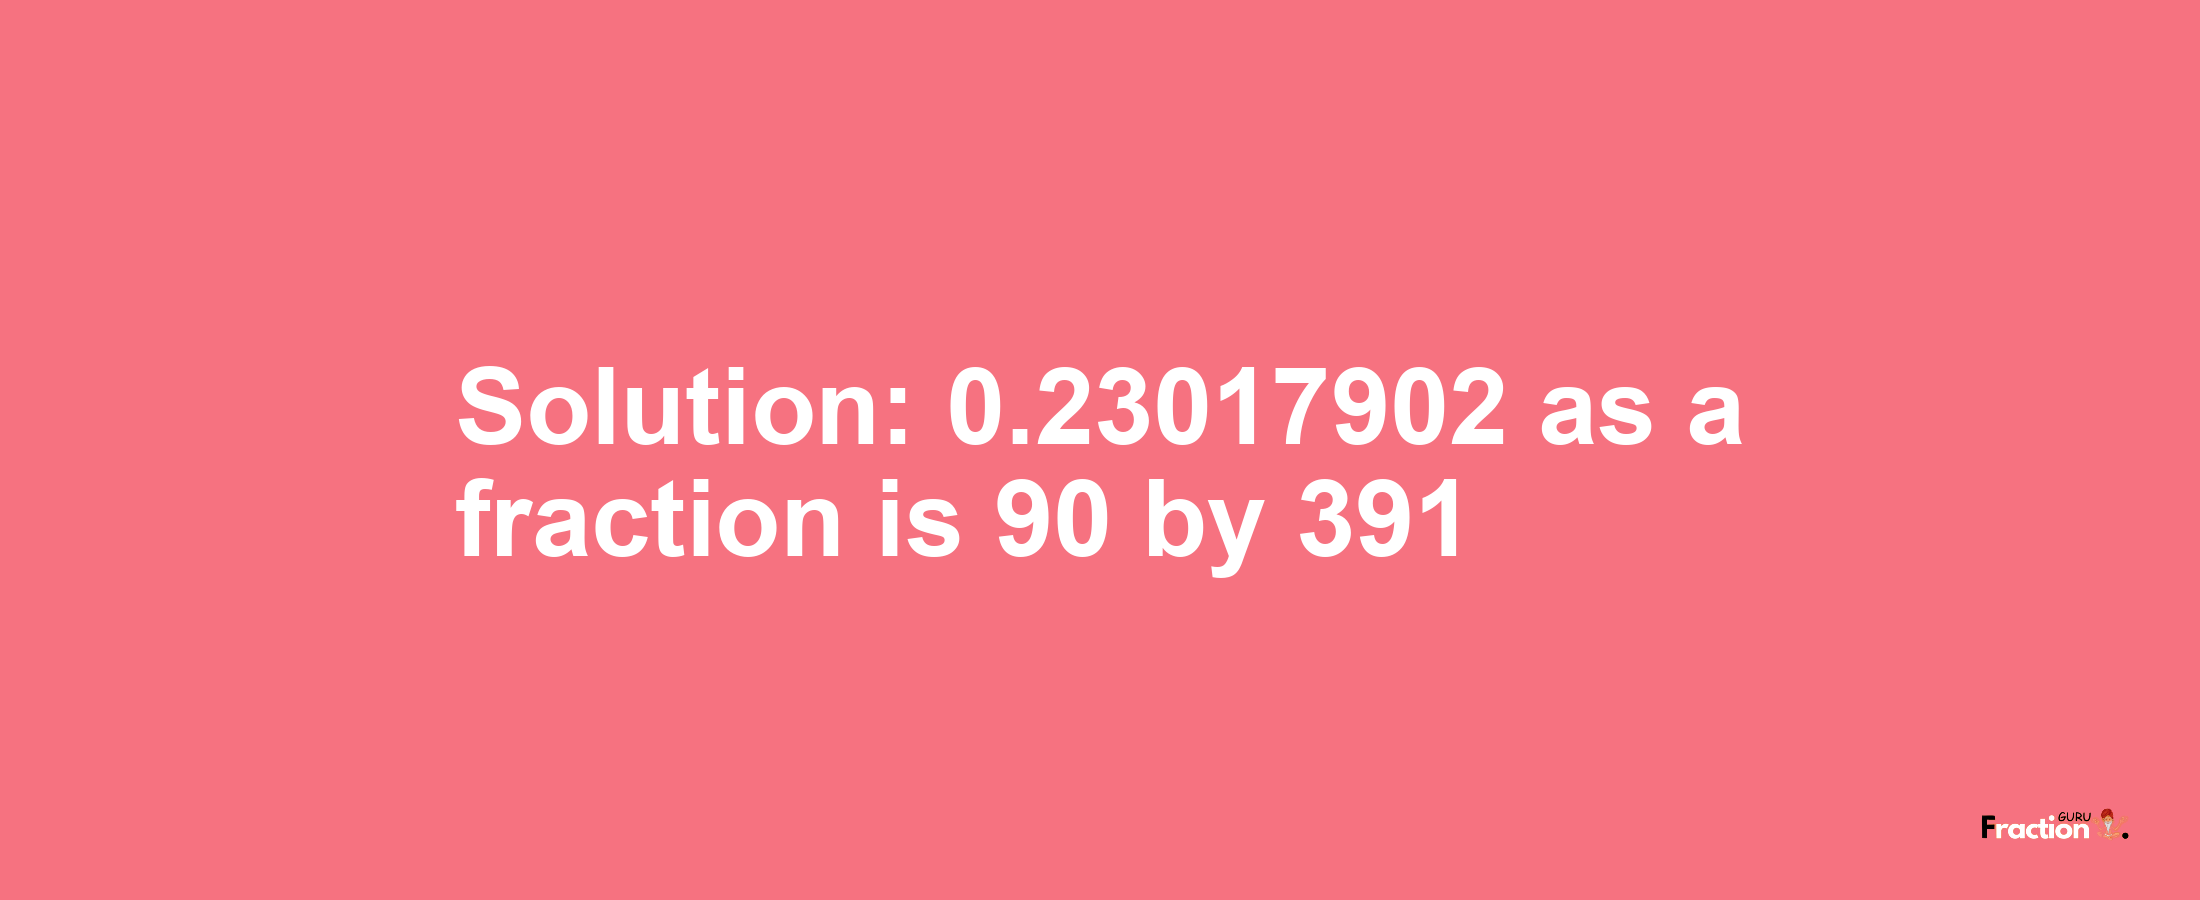 Solution:0.23017902 as a fraction is 90/391